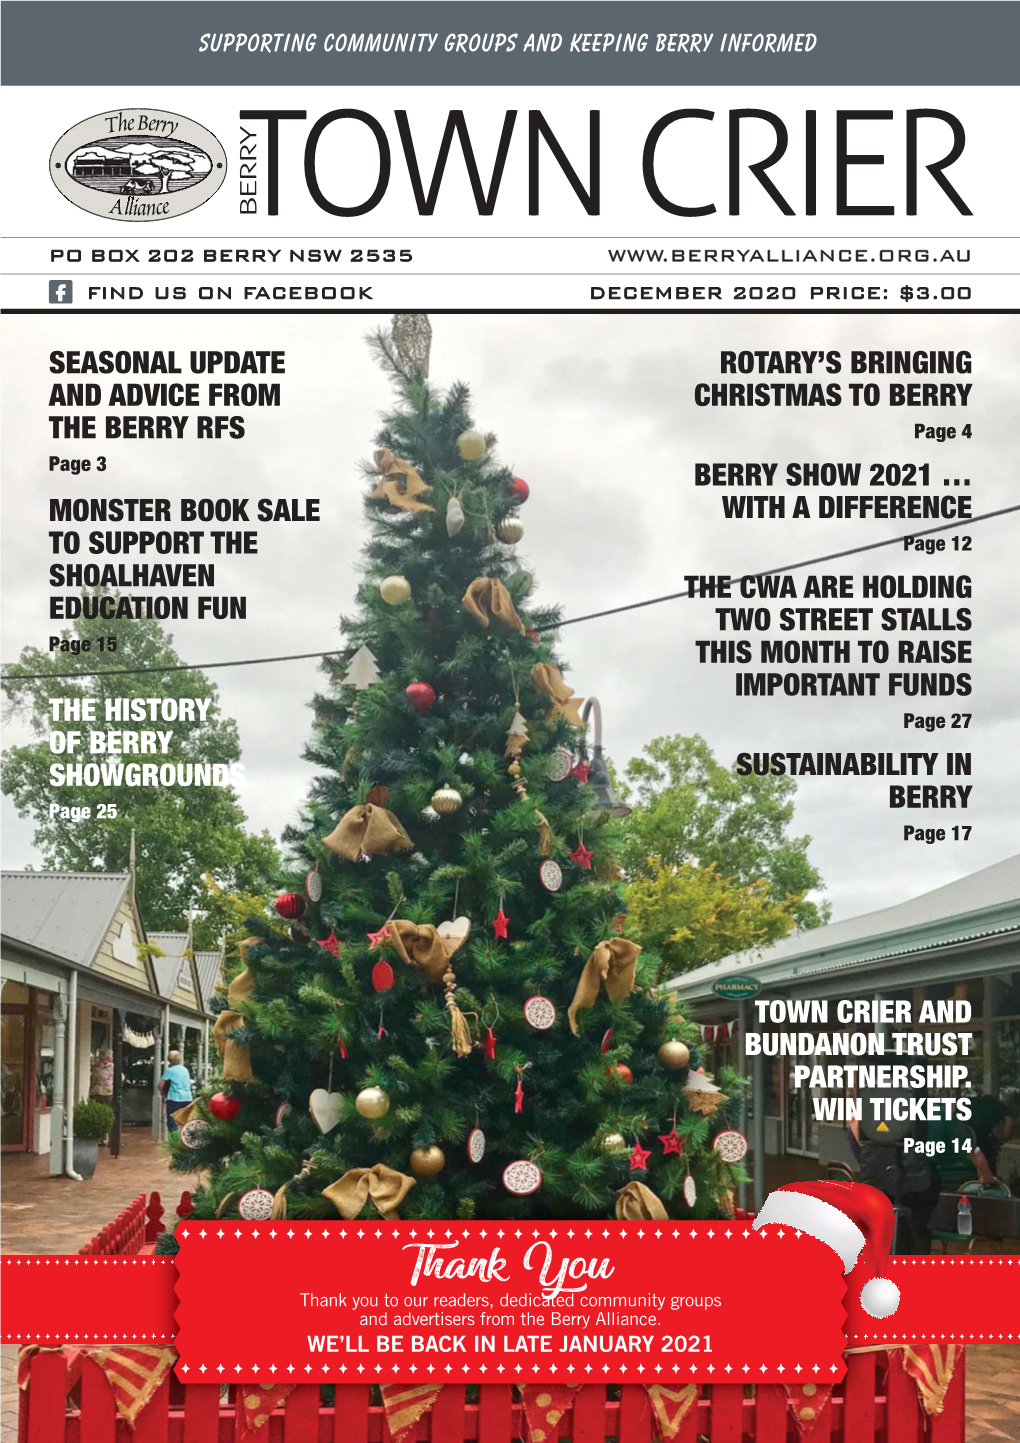 BERRY TOWN CRIER ELECTRONIC COPY of the COLOUR and RECEIVE: BERRY TOWN CRIER EACH ISSUE EDITION Just Email Info@Berryalliance.Org.Au and Give Us Your